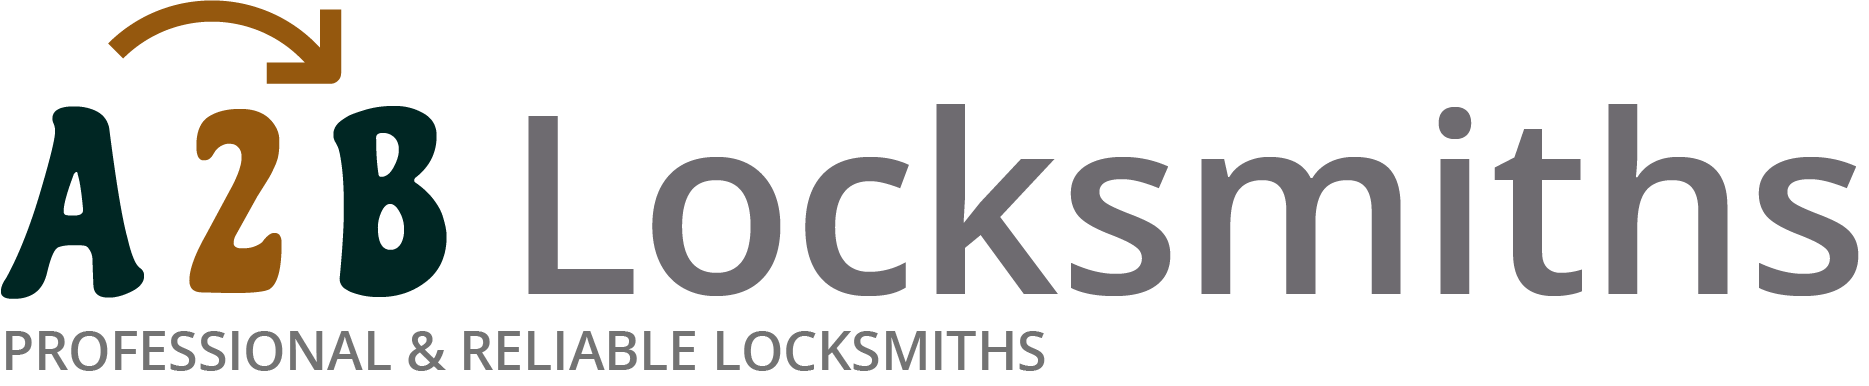 If you are locked out of house in Ilkley, our 24/7 local emergency locksmith services can help you.